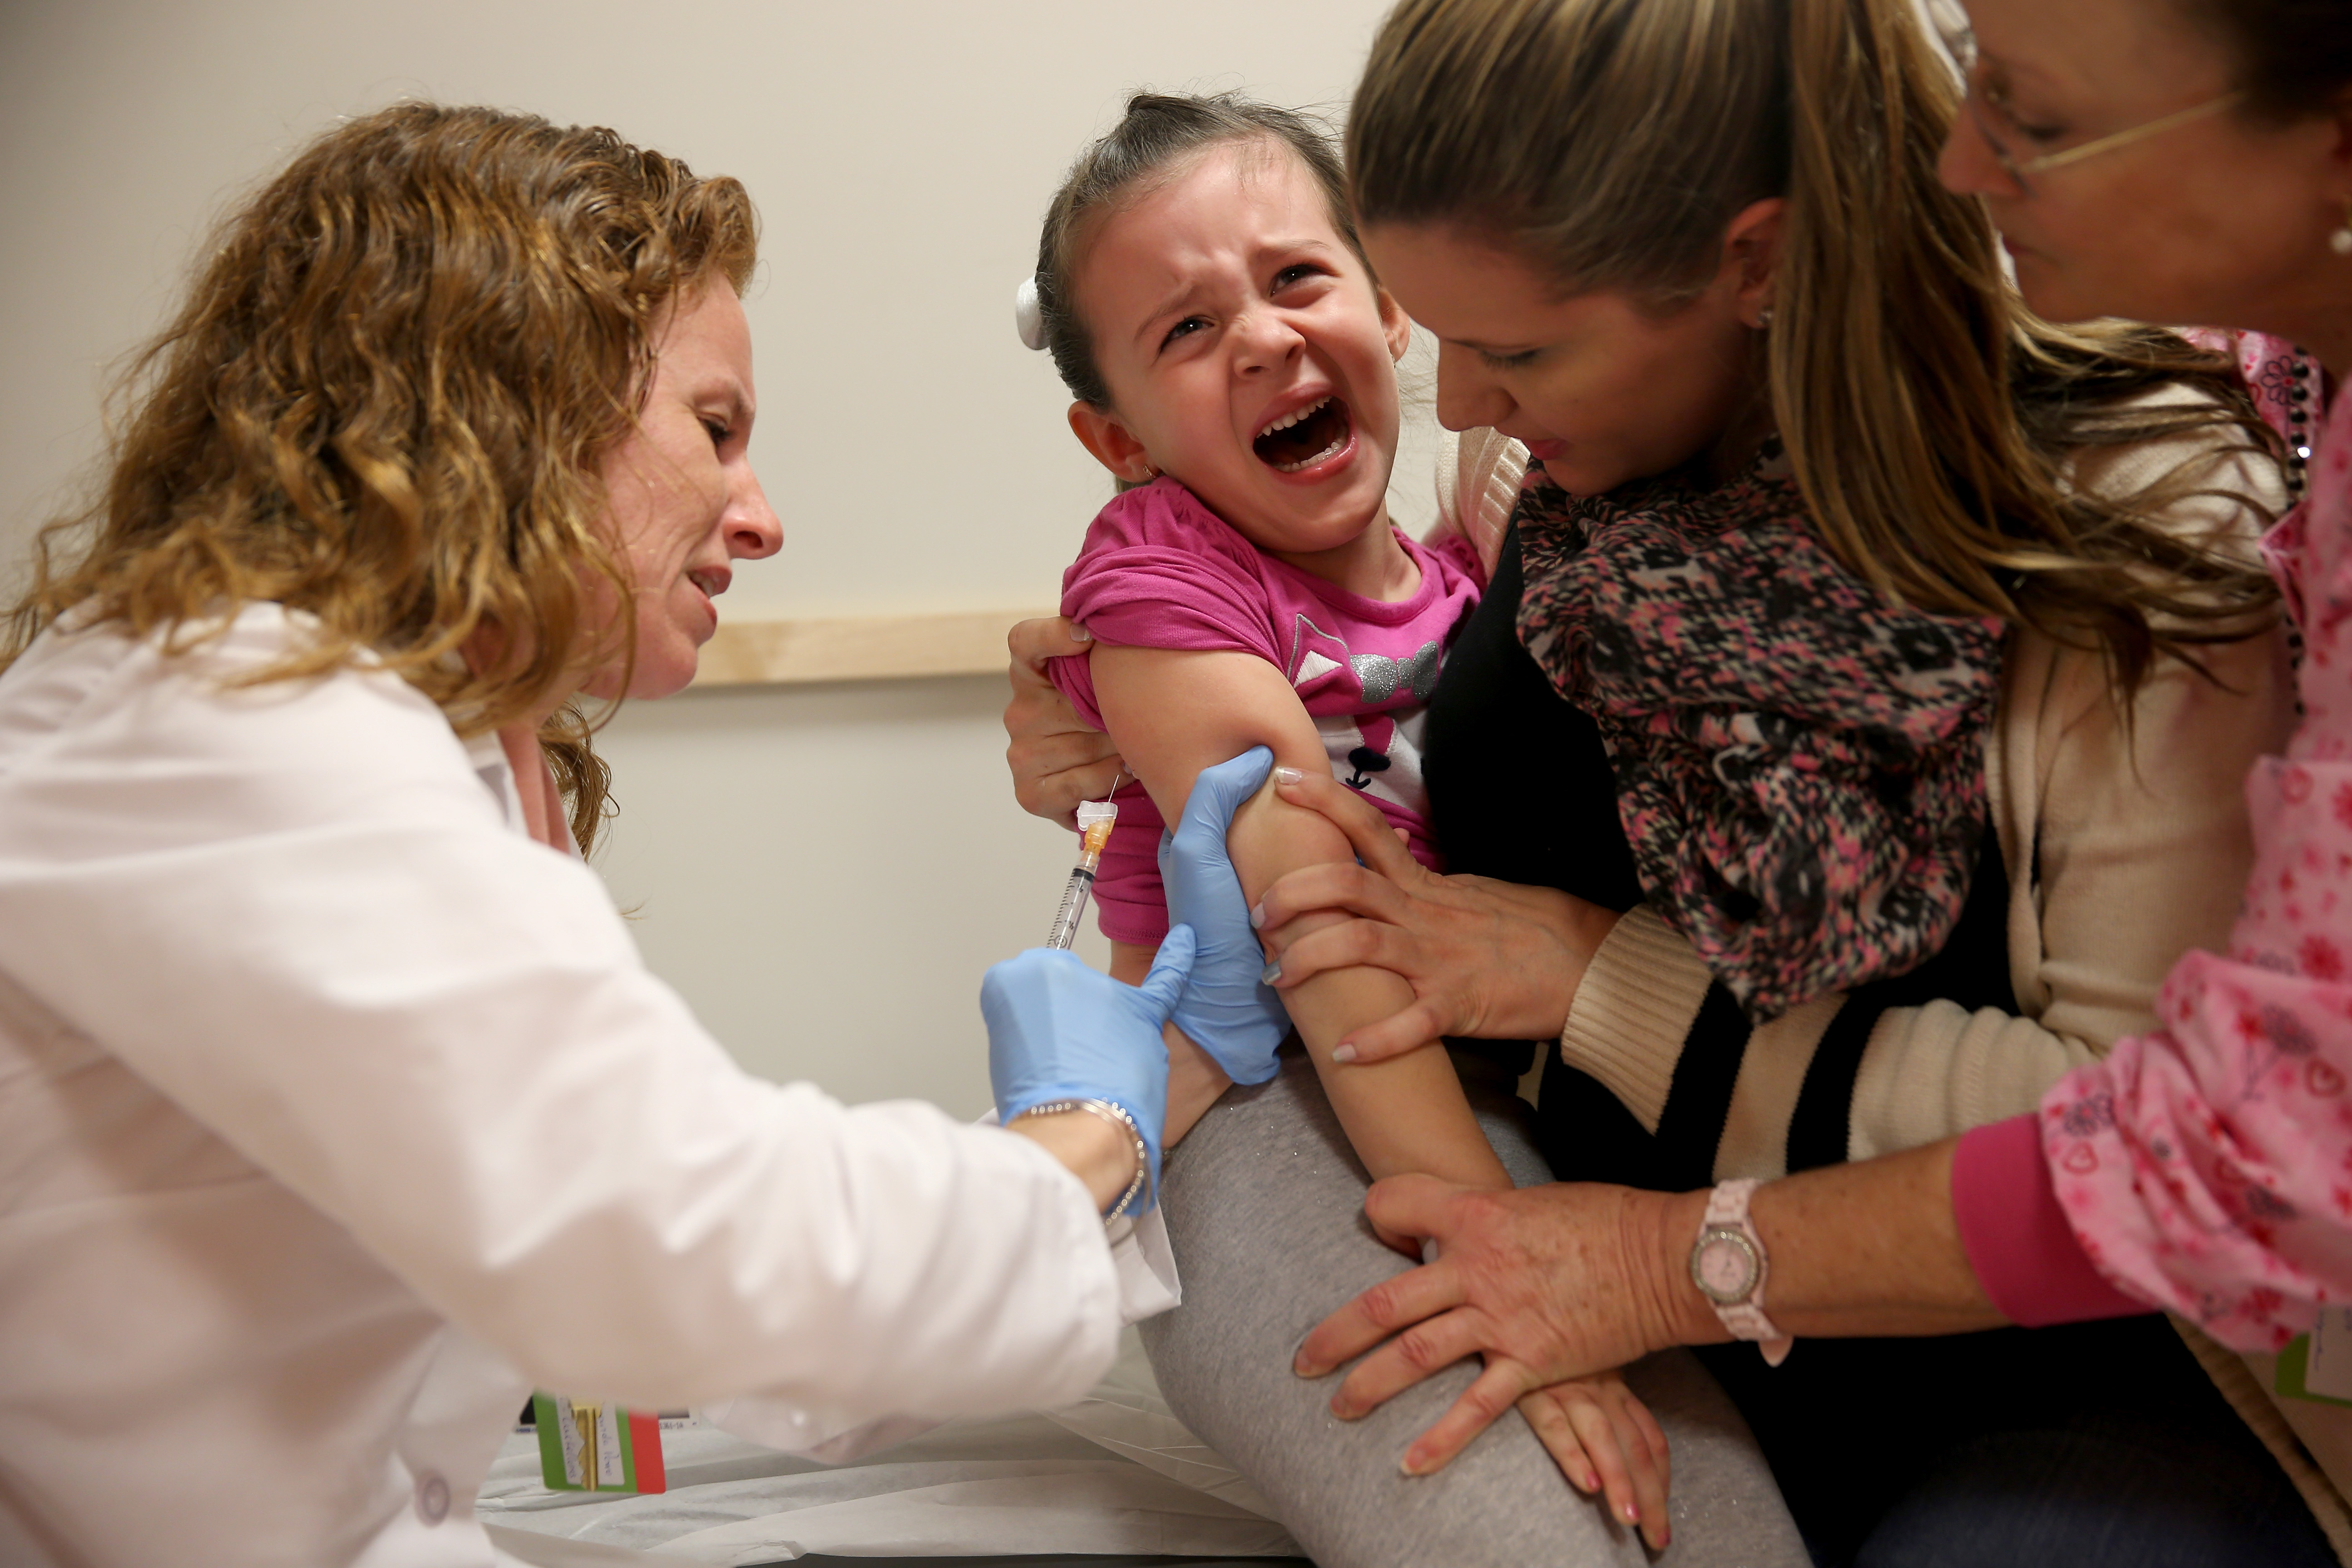 Miami Children's Hospital pediatrician Dr. Amanda Porro, M.D administers a measles vaccination to Sophie Barquin, 4, as her mother Gabrielle Barquin and Miami Children's Hospital. Photo by Joe Raedle/Getty Images